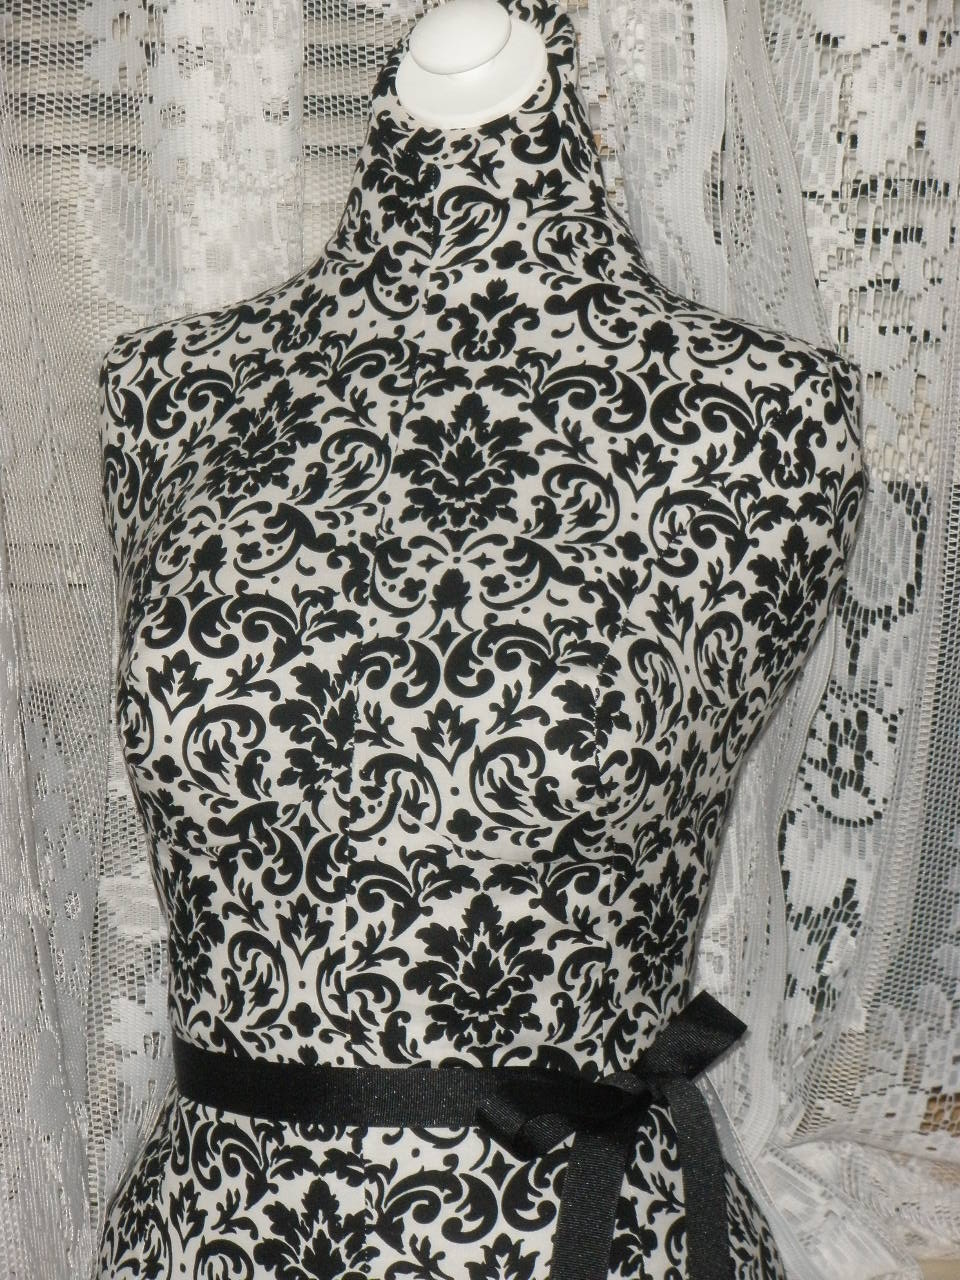 Boutique Dress Form Designs. Life Size Torso Great For Store Front Or Home Decor Inspired By Pottery Barn. Black And White Damask Print.